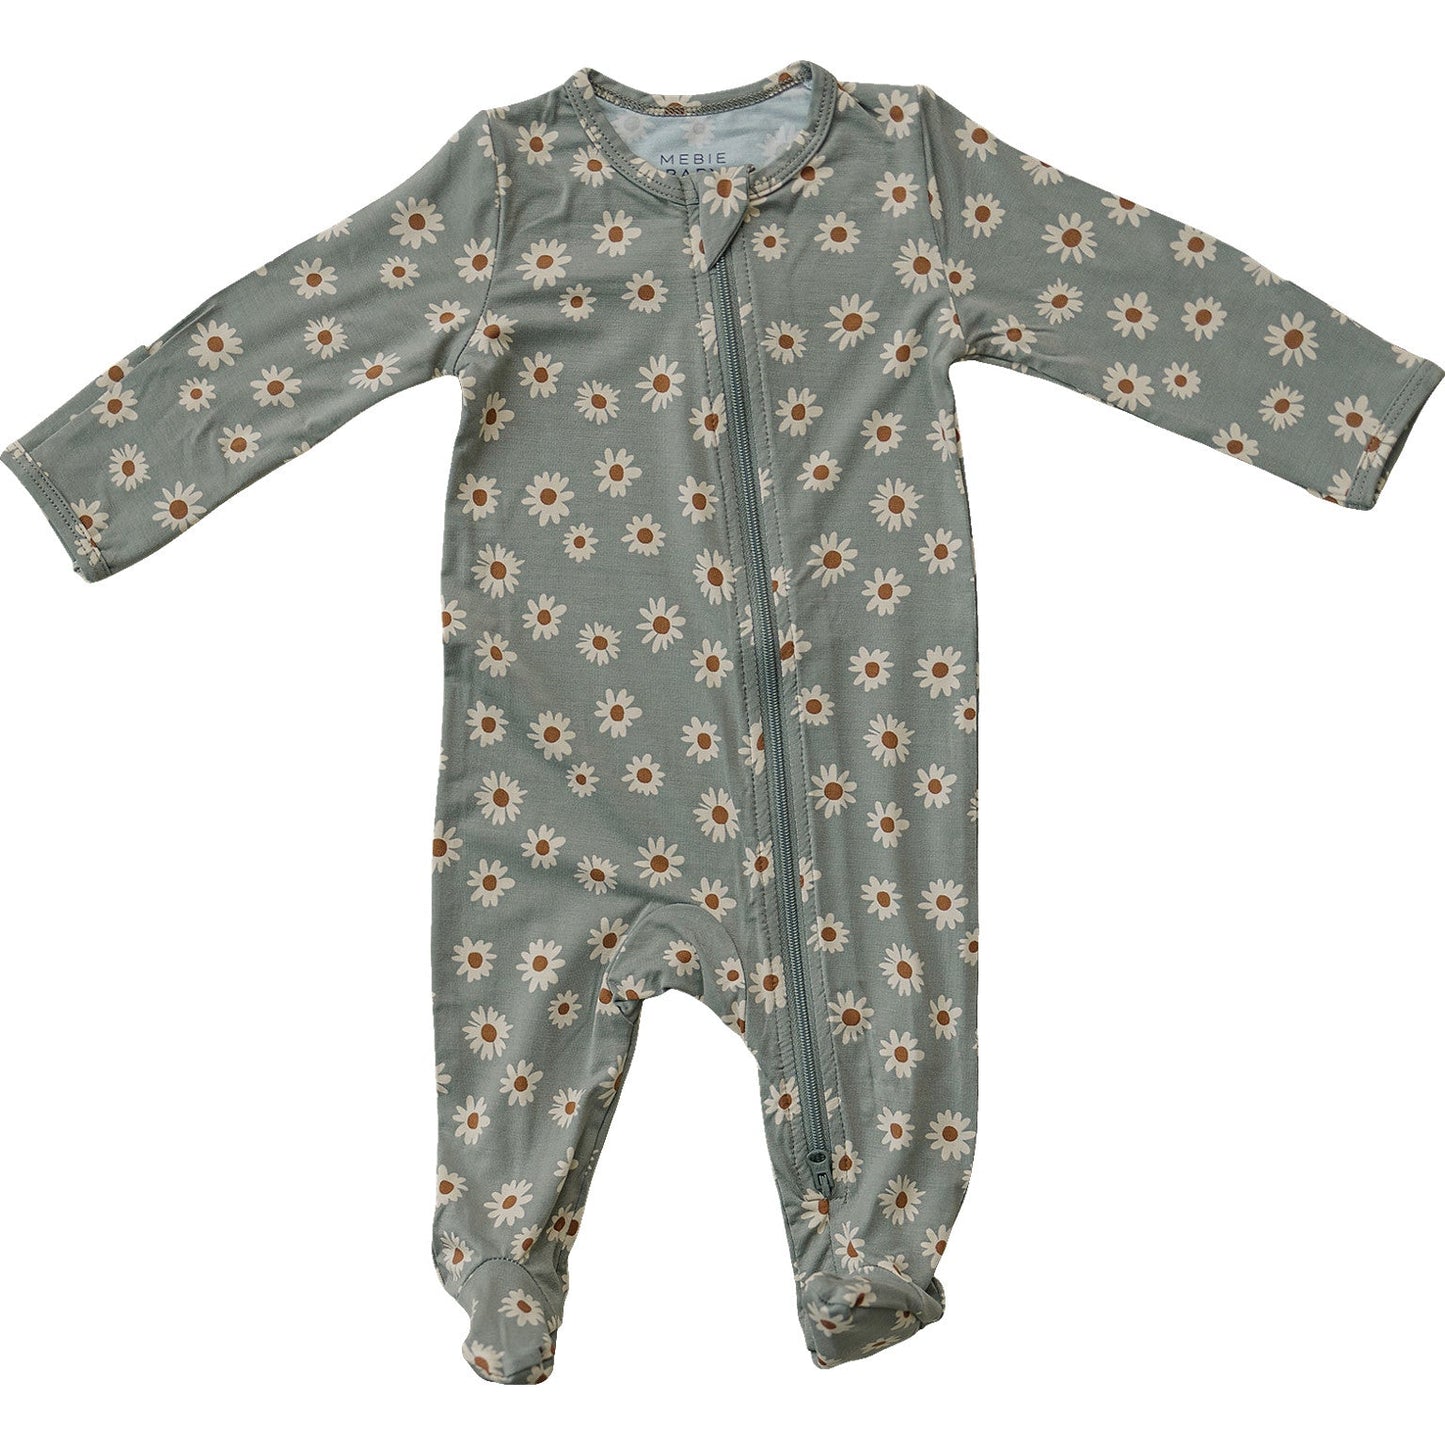 Mebie Baby Light Green Daisy Footed Bamboo Romper